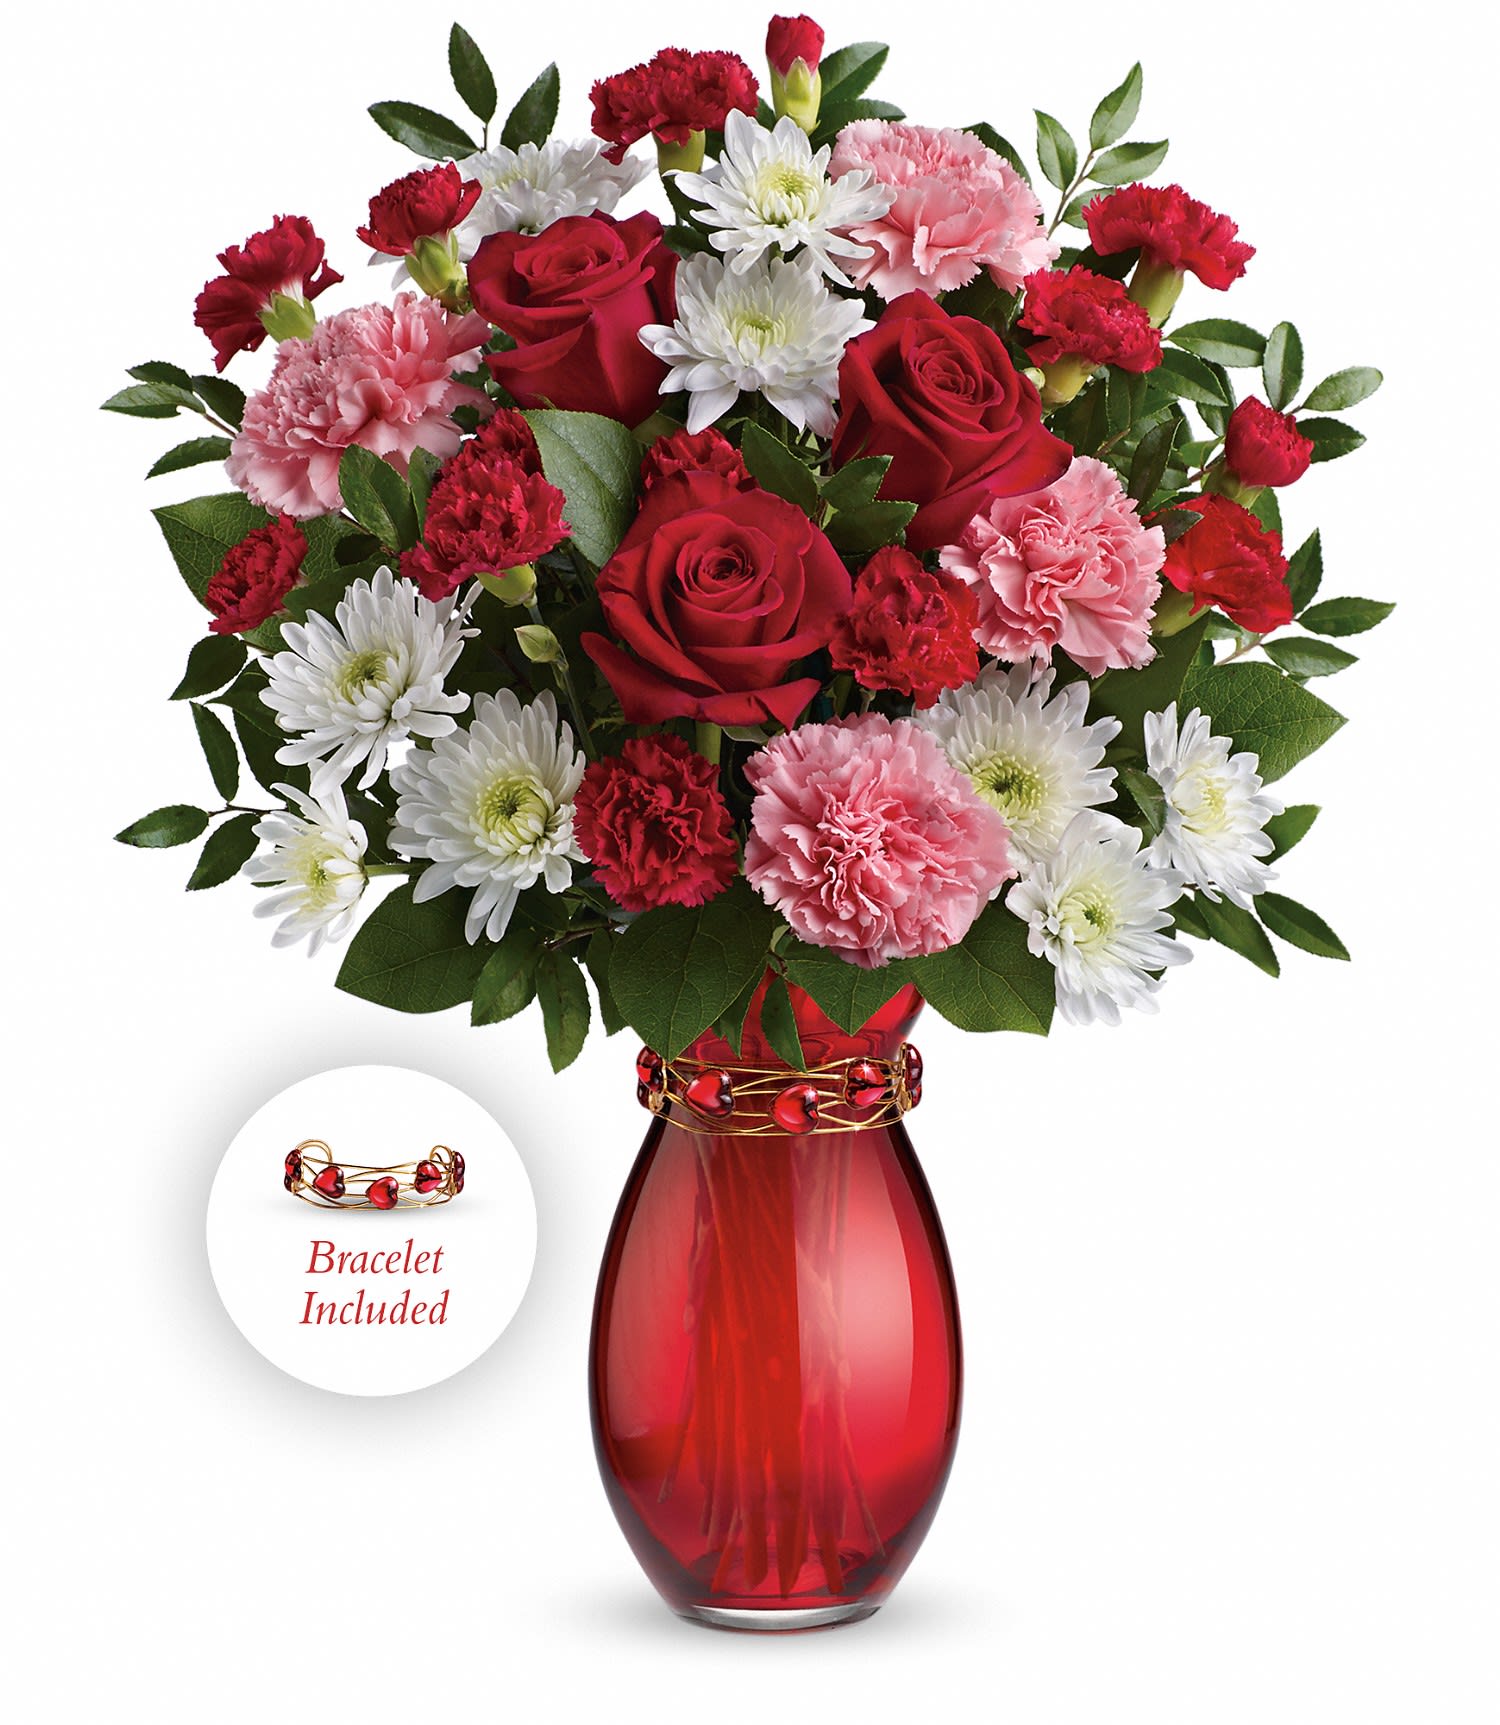 Sweet Embrace Bouquet - This sweet arrangement includes red roses, pink carnations, miniature red carnations, white cushion spray chrysanthemums, huckleberry and lemon leaf. Delivered in a Sweet Embrace vase with adjustable bracelet. Approximately 14 1/2&quot; W x 18&quot; H  T15V100A